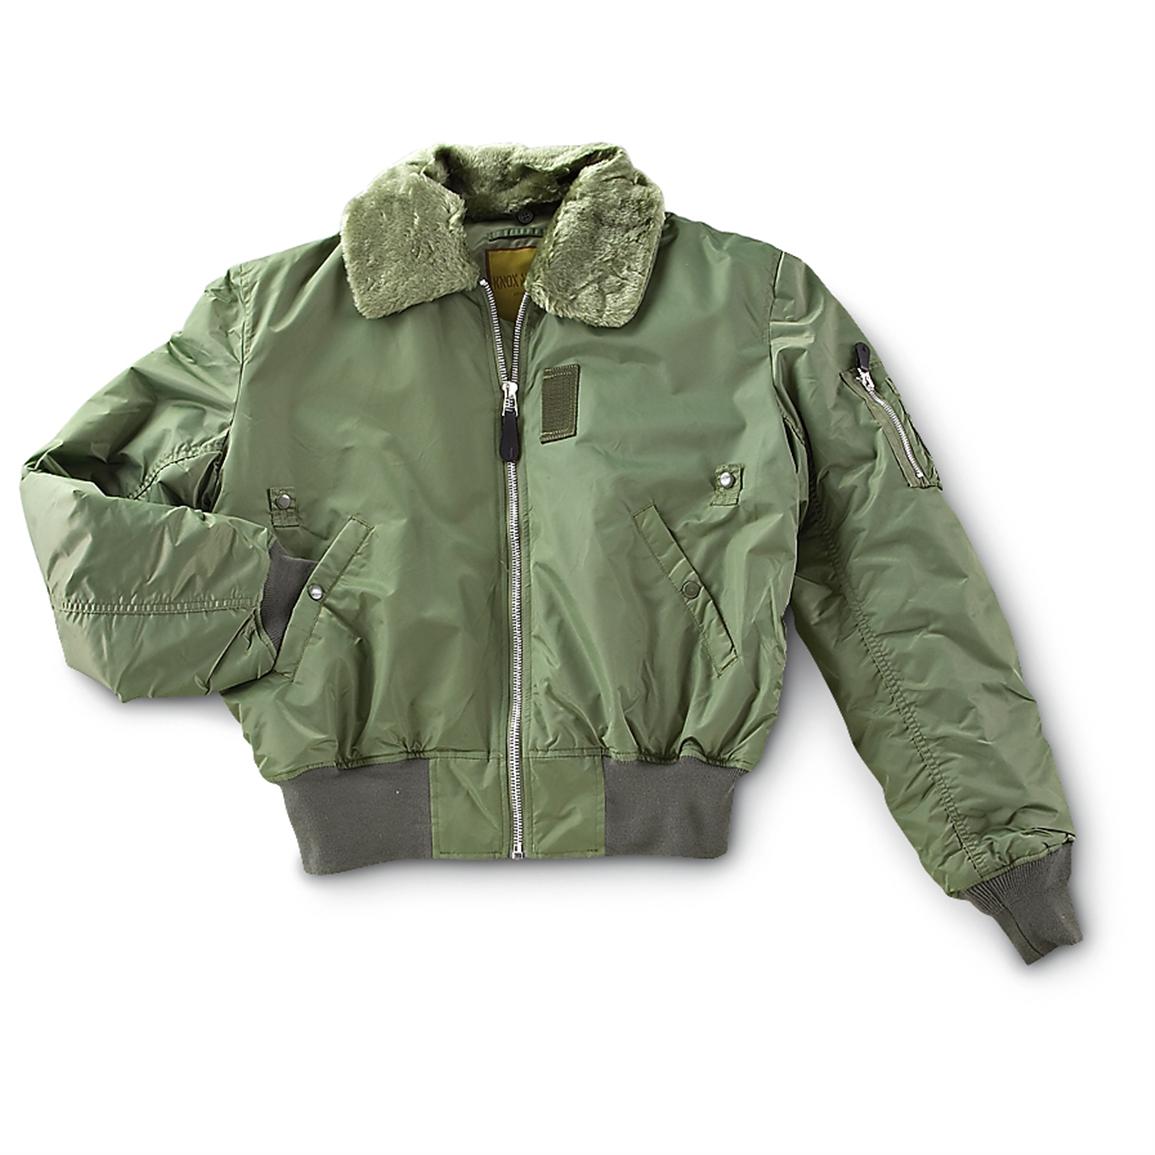 military surplus bomber jackets for men - jackets in my home